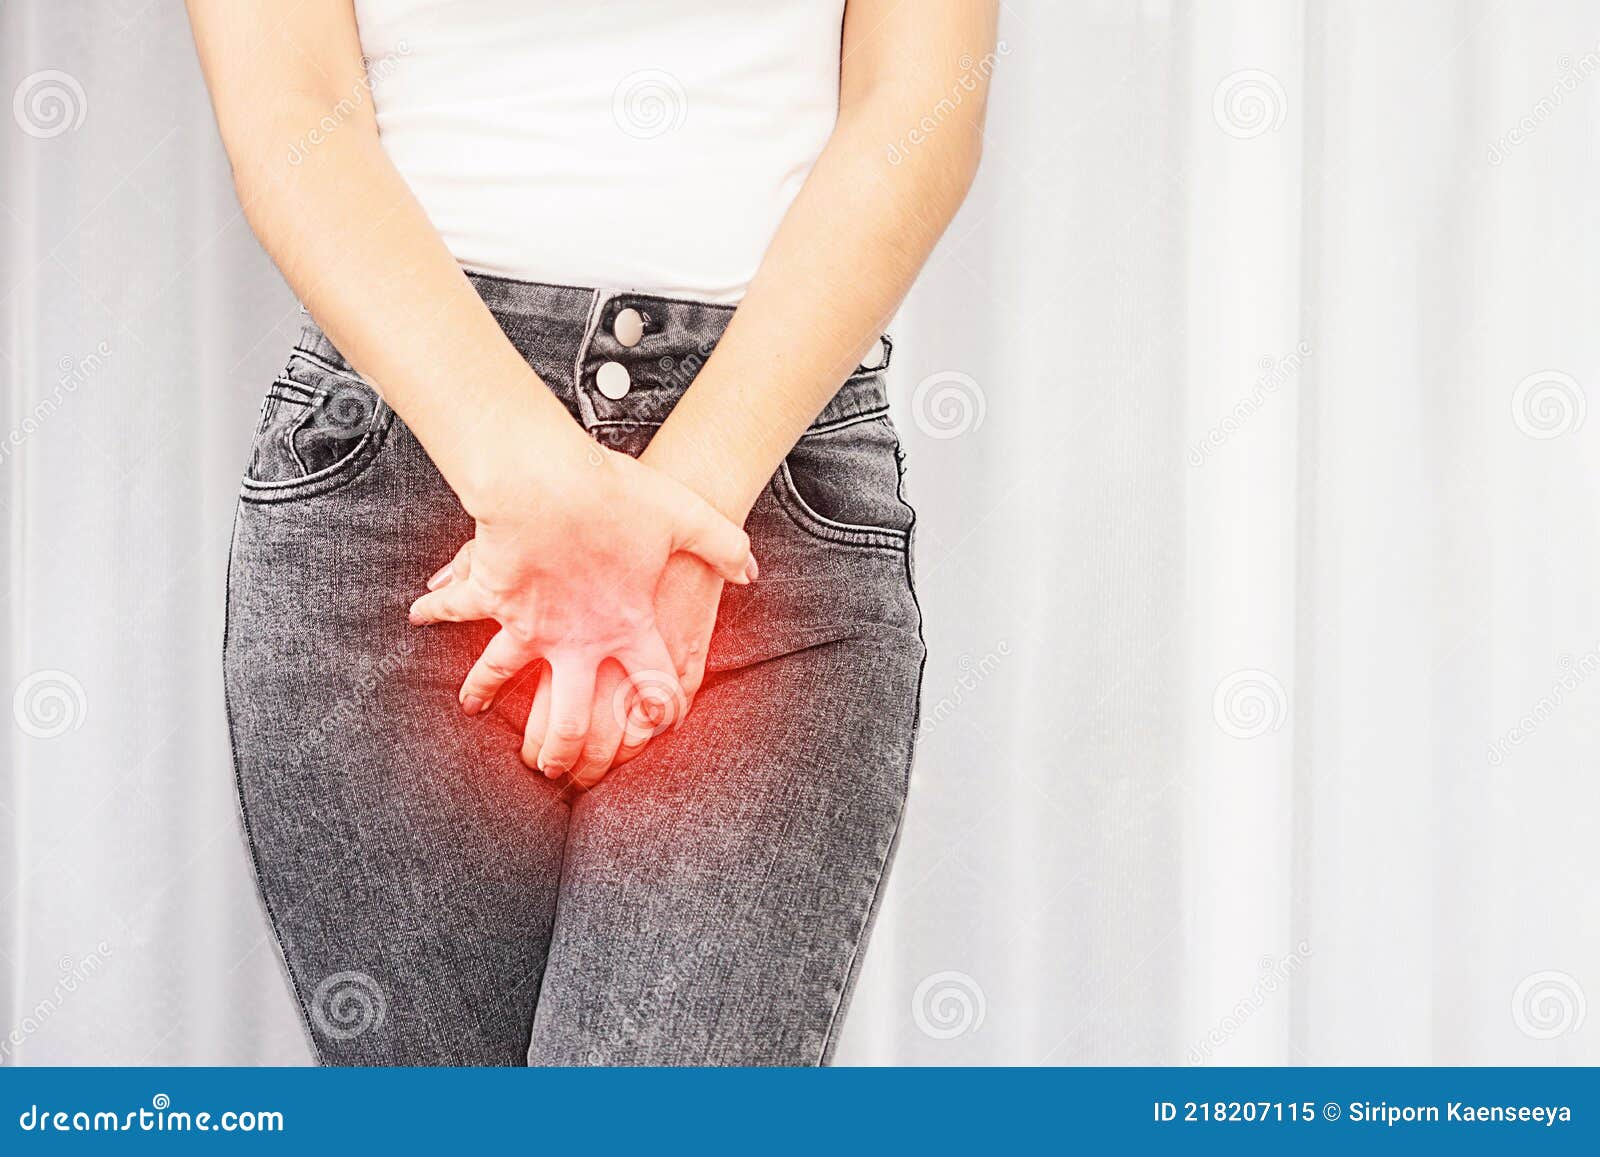 woman suffering from pain, itchy crotch hand holding her burning  vaginal caused by bladder infections or cystitis